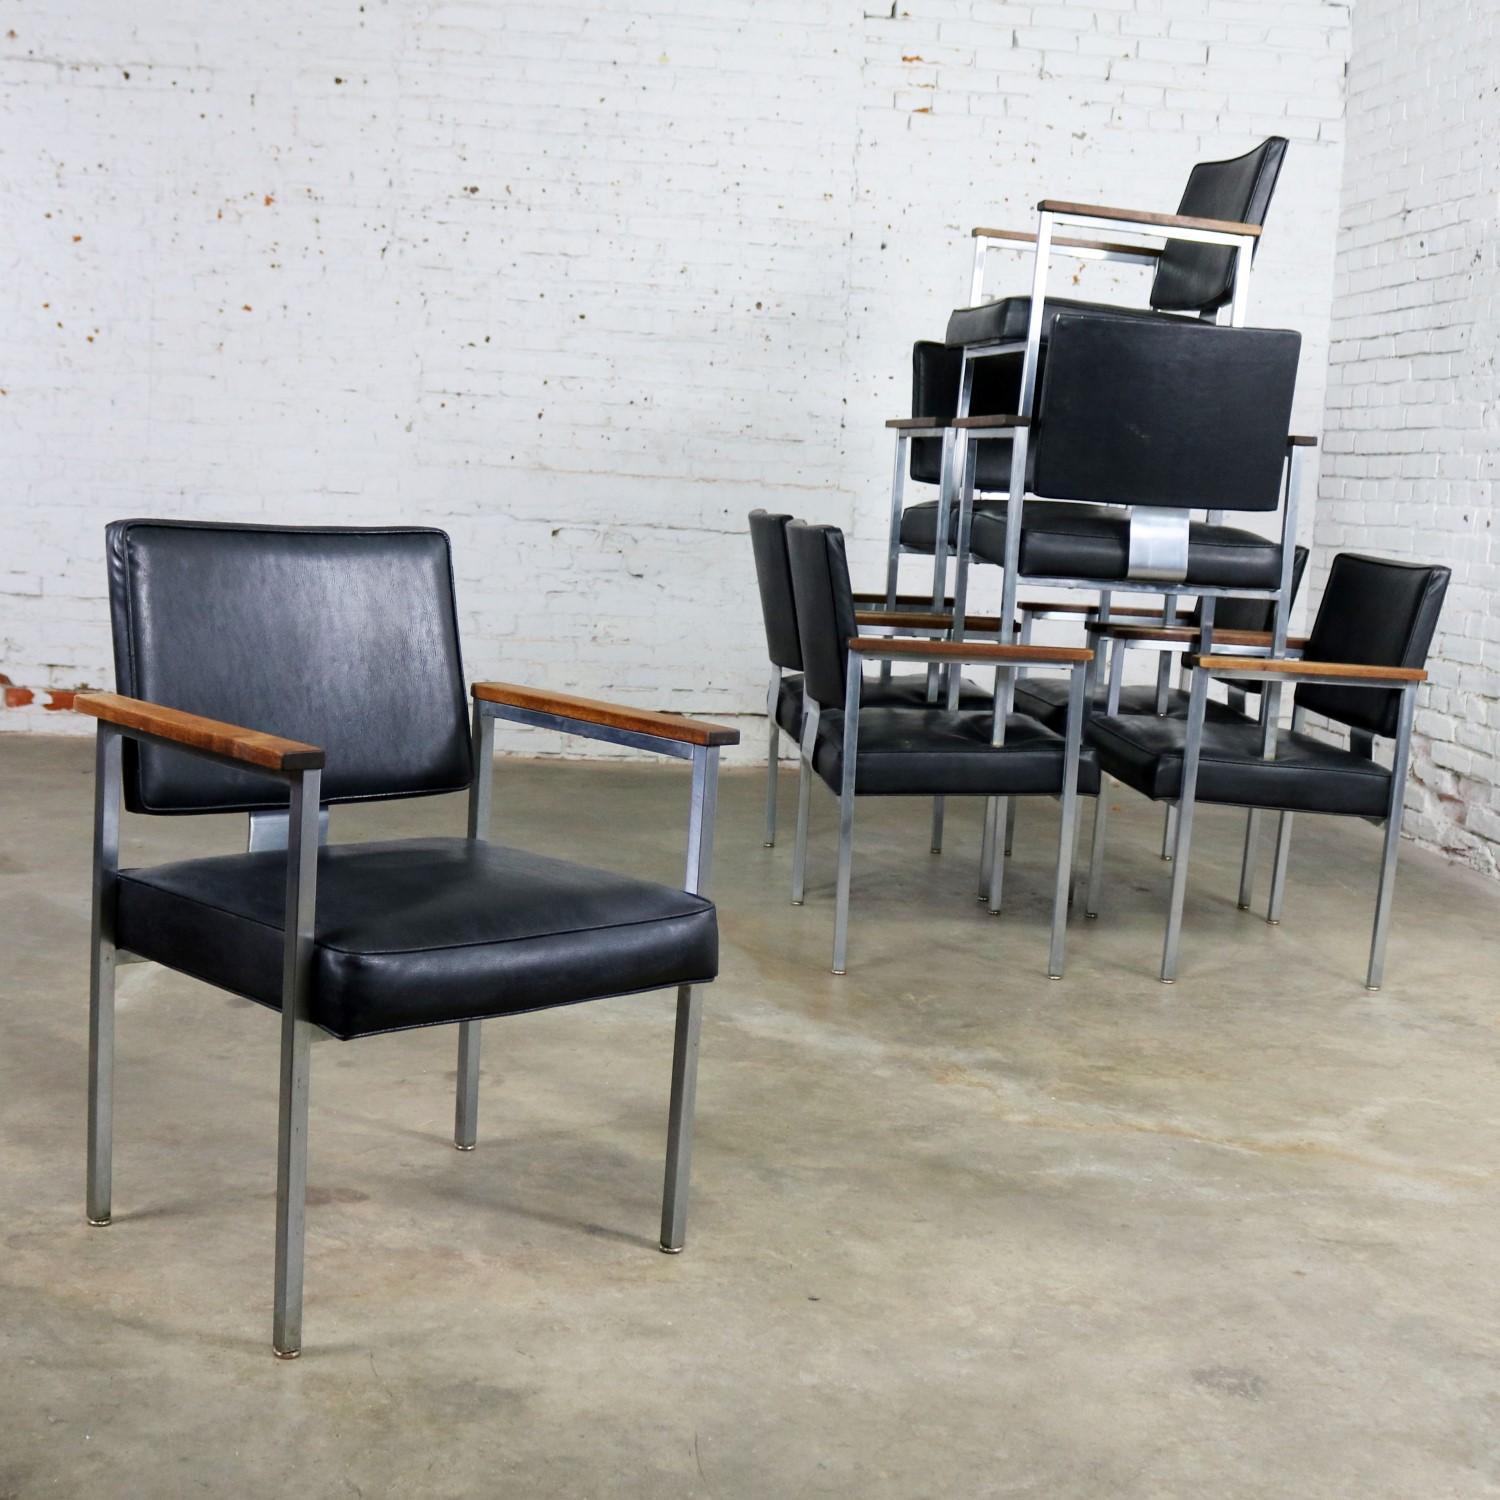 Handsome set of 8 MCM Mid-Century Modern dining or conference room chairs in brushed steel tube and black vinyl upholstery with walnut arms. These chairs were produced by InterRoyal Corp, circa 1970s. They are in fabulous vintage condition with the